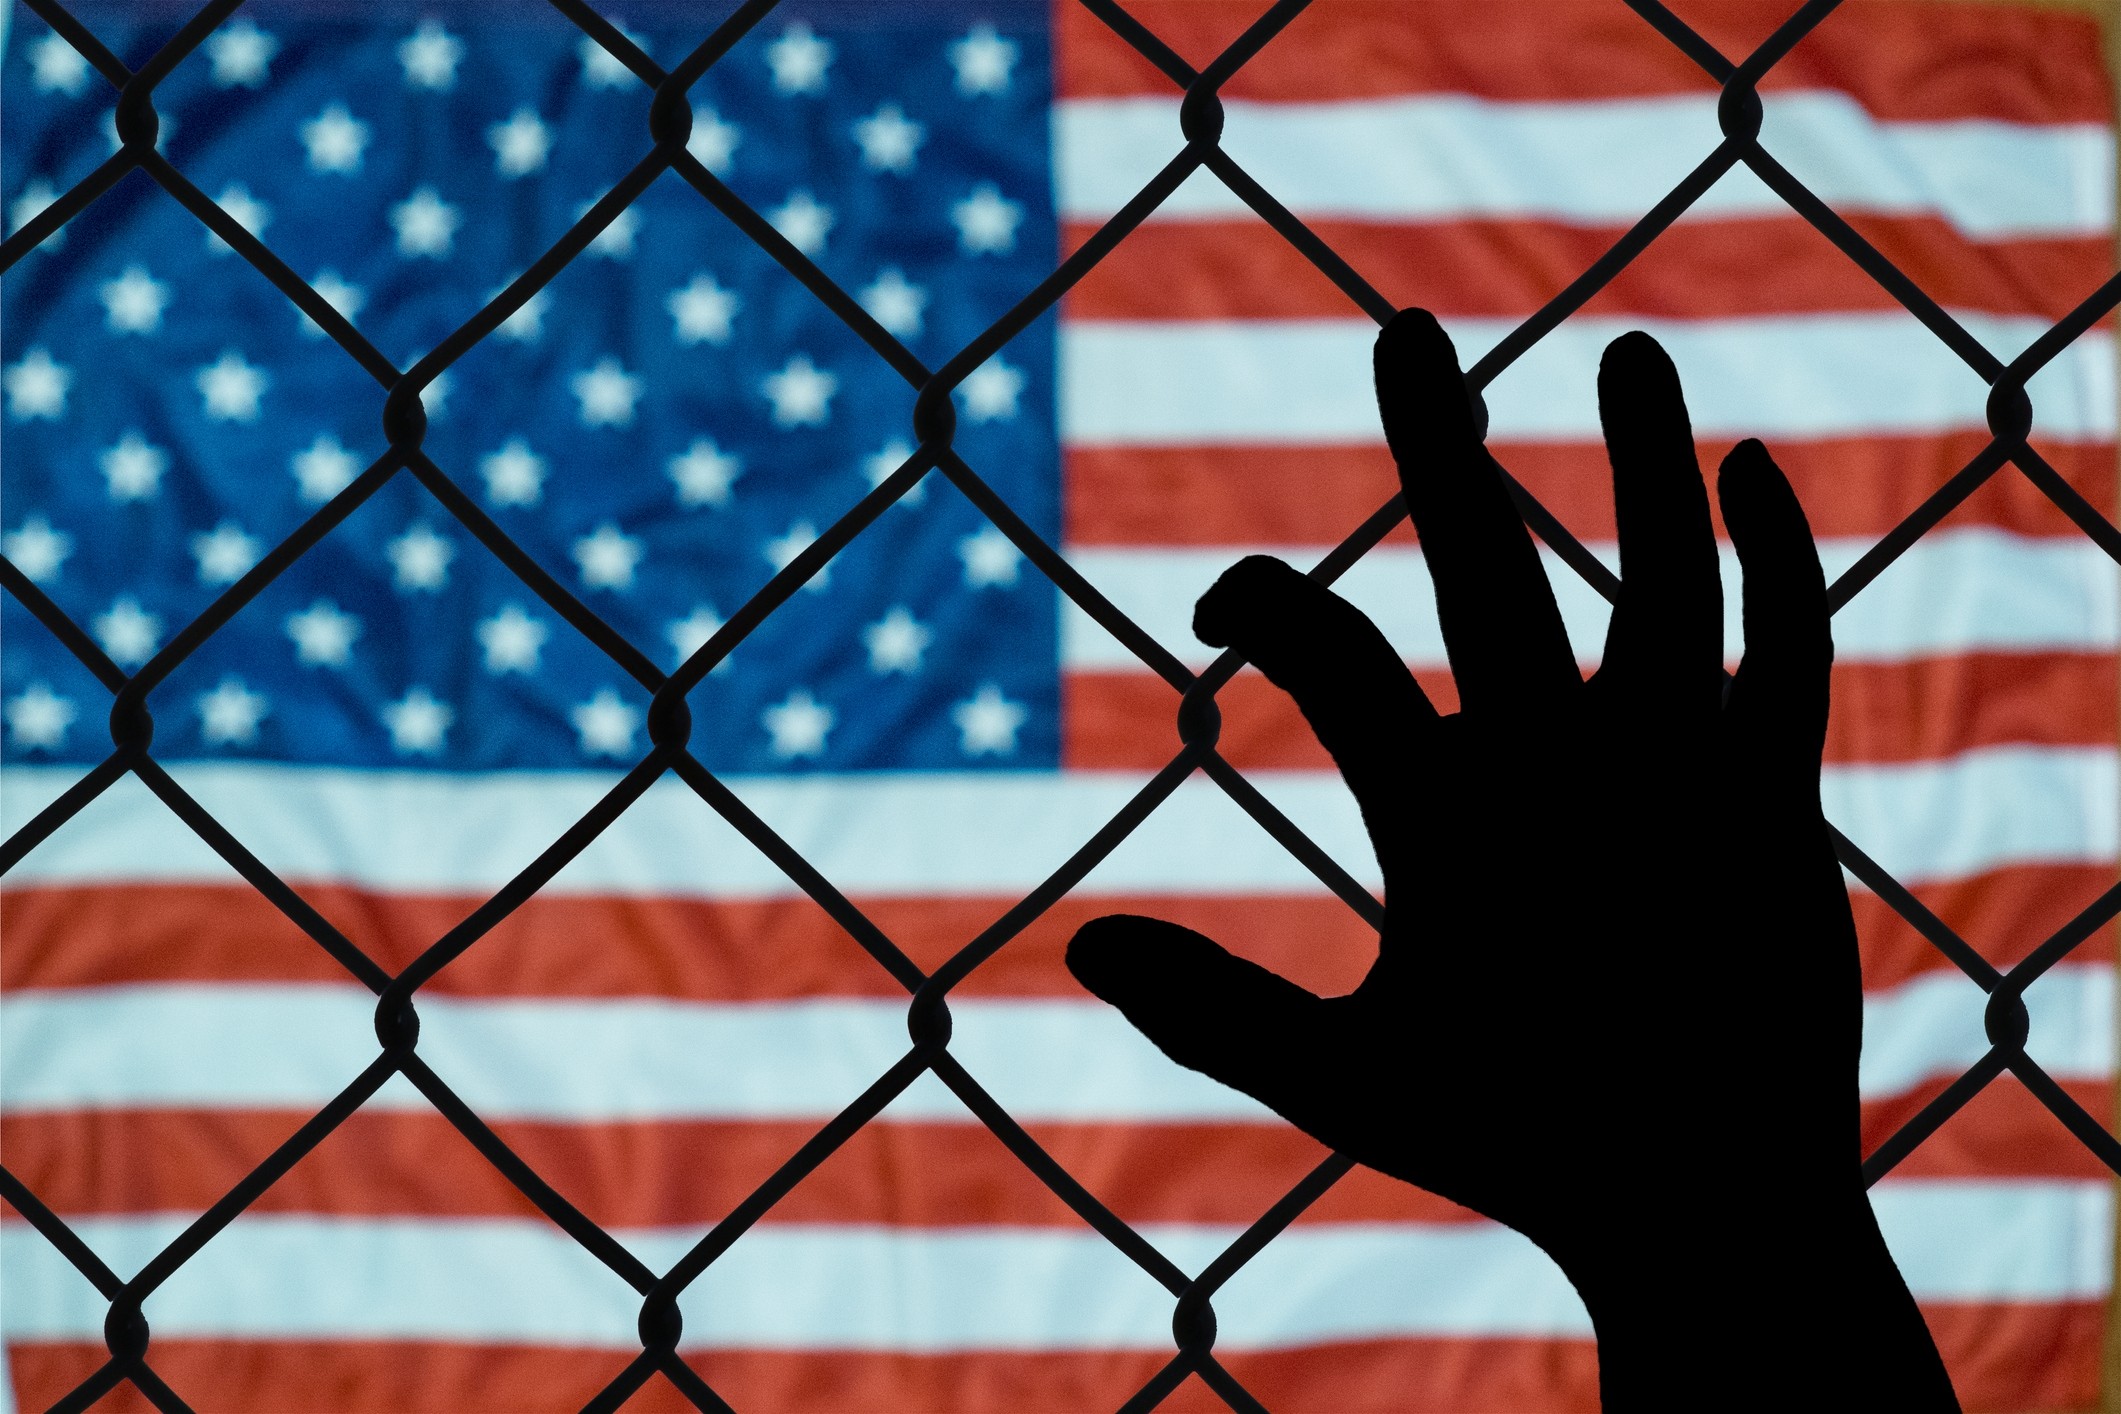 US flag behind chain-link fence